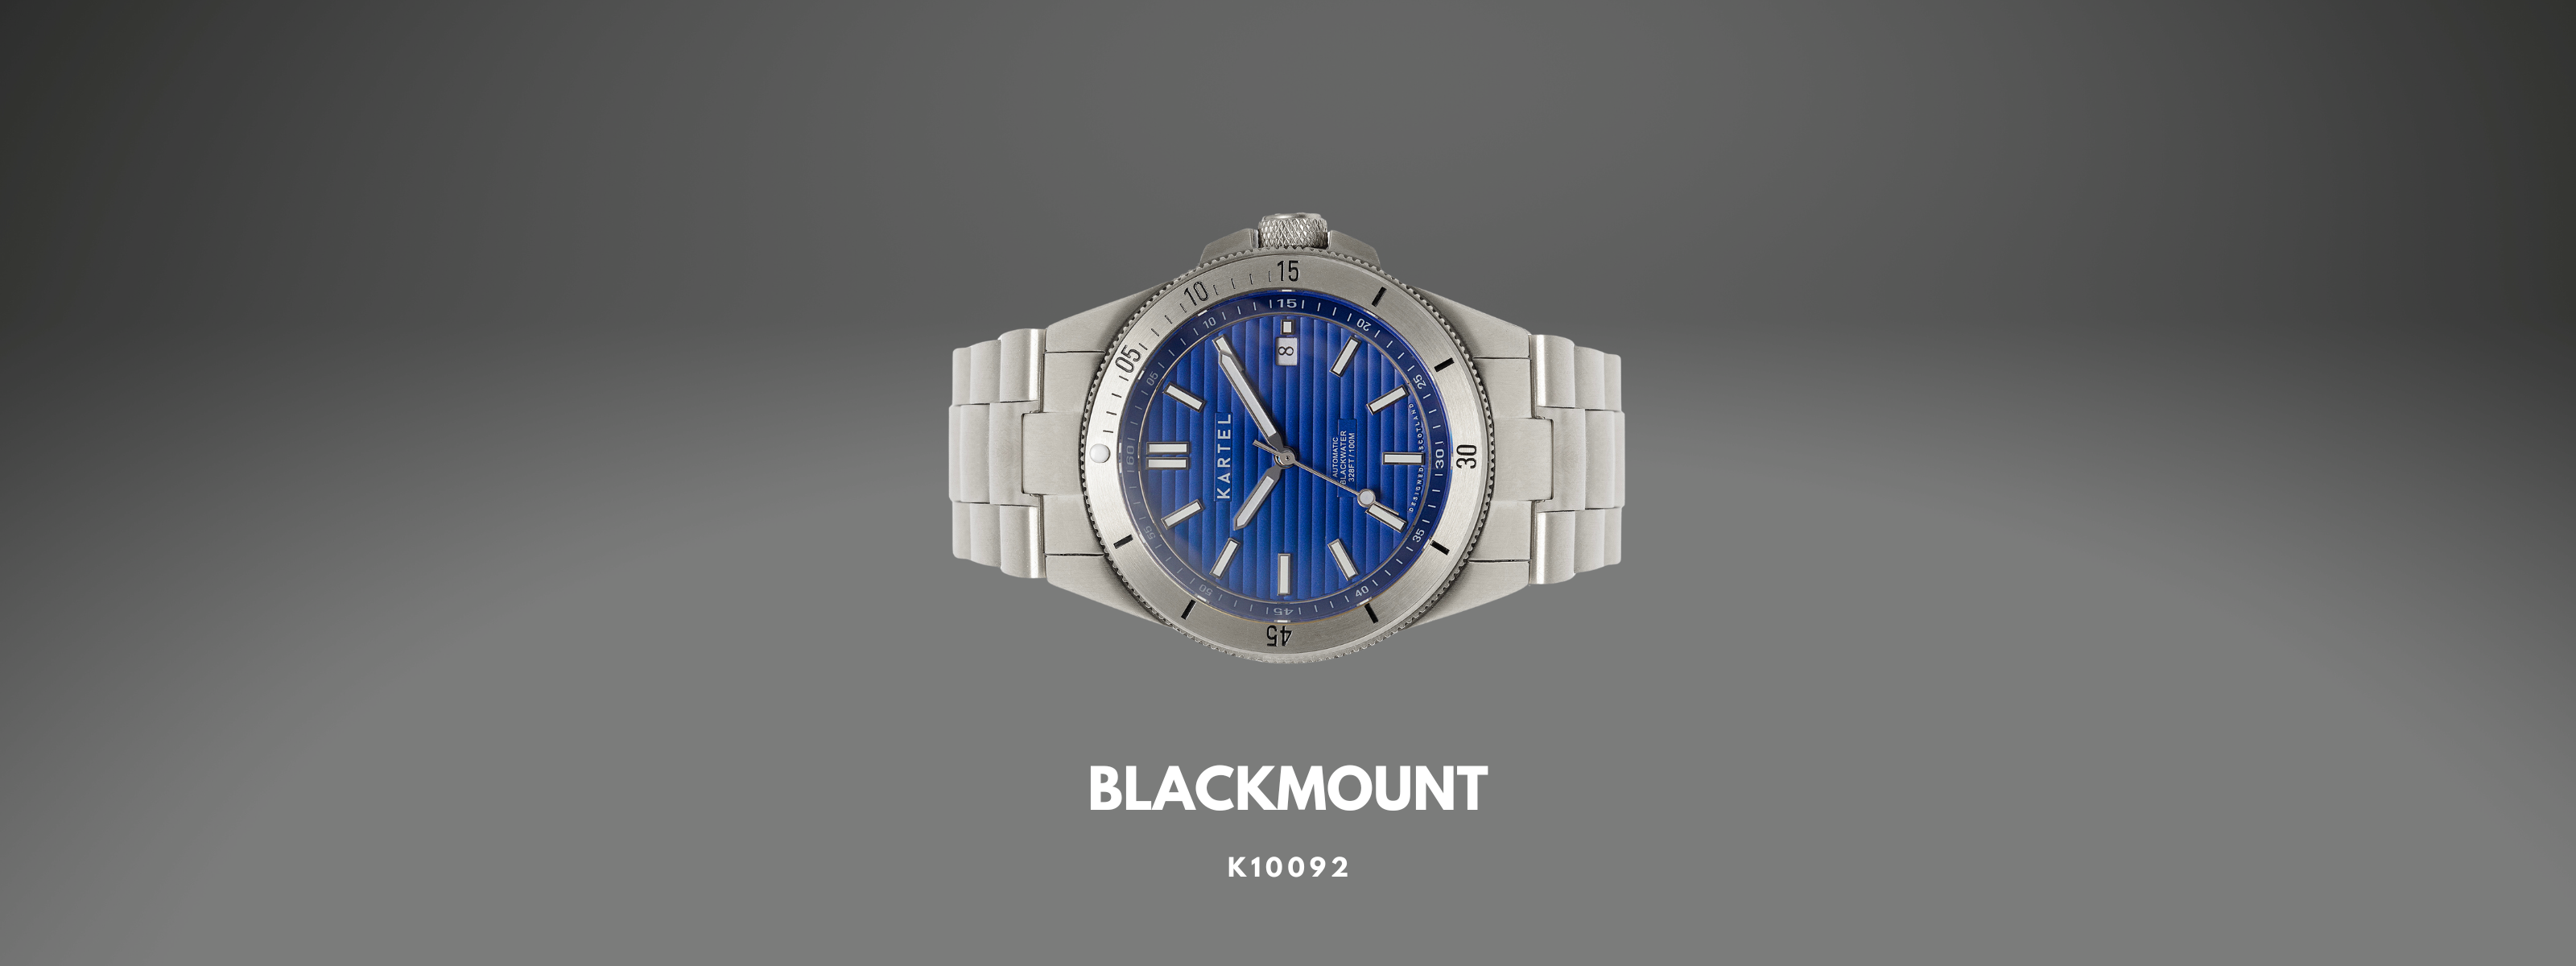 Introducing Kartel Watches' Premium Automatic Collection Featuring Blair and Blackmount models